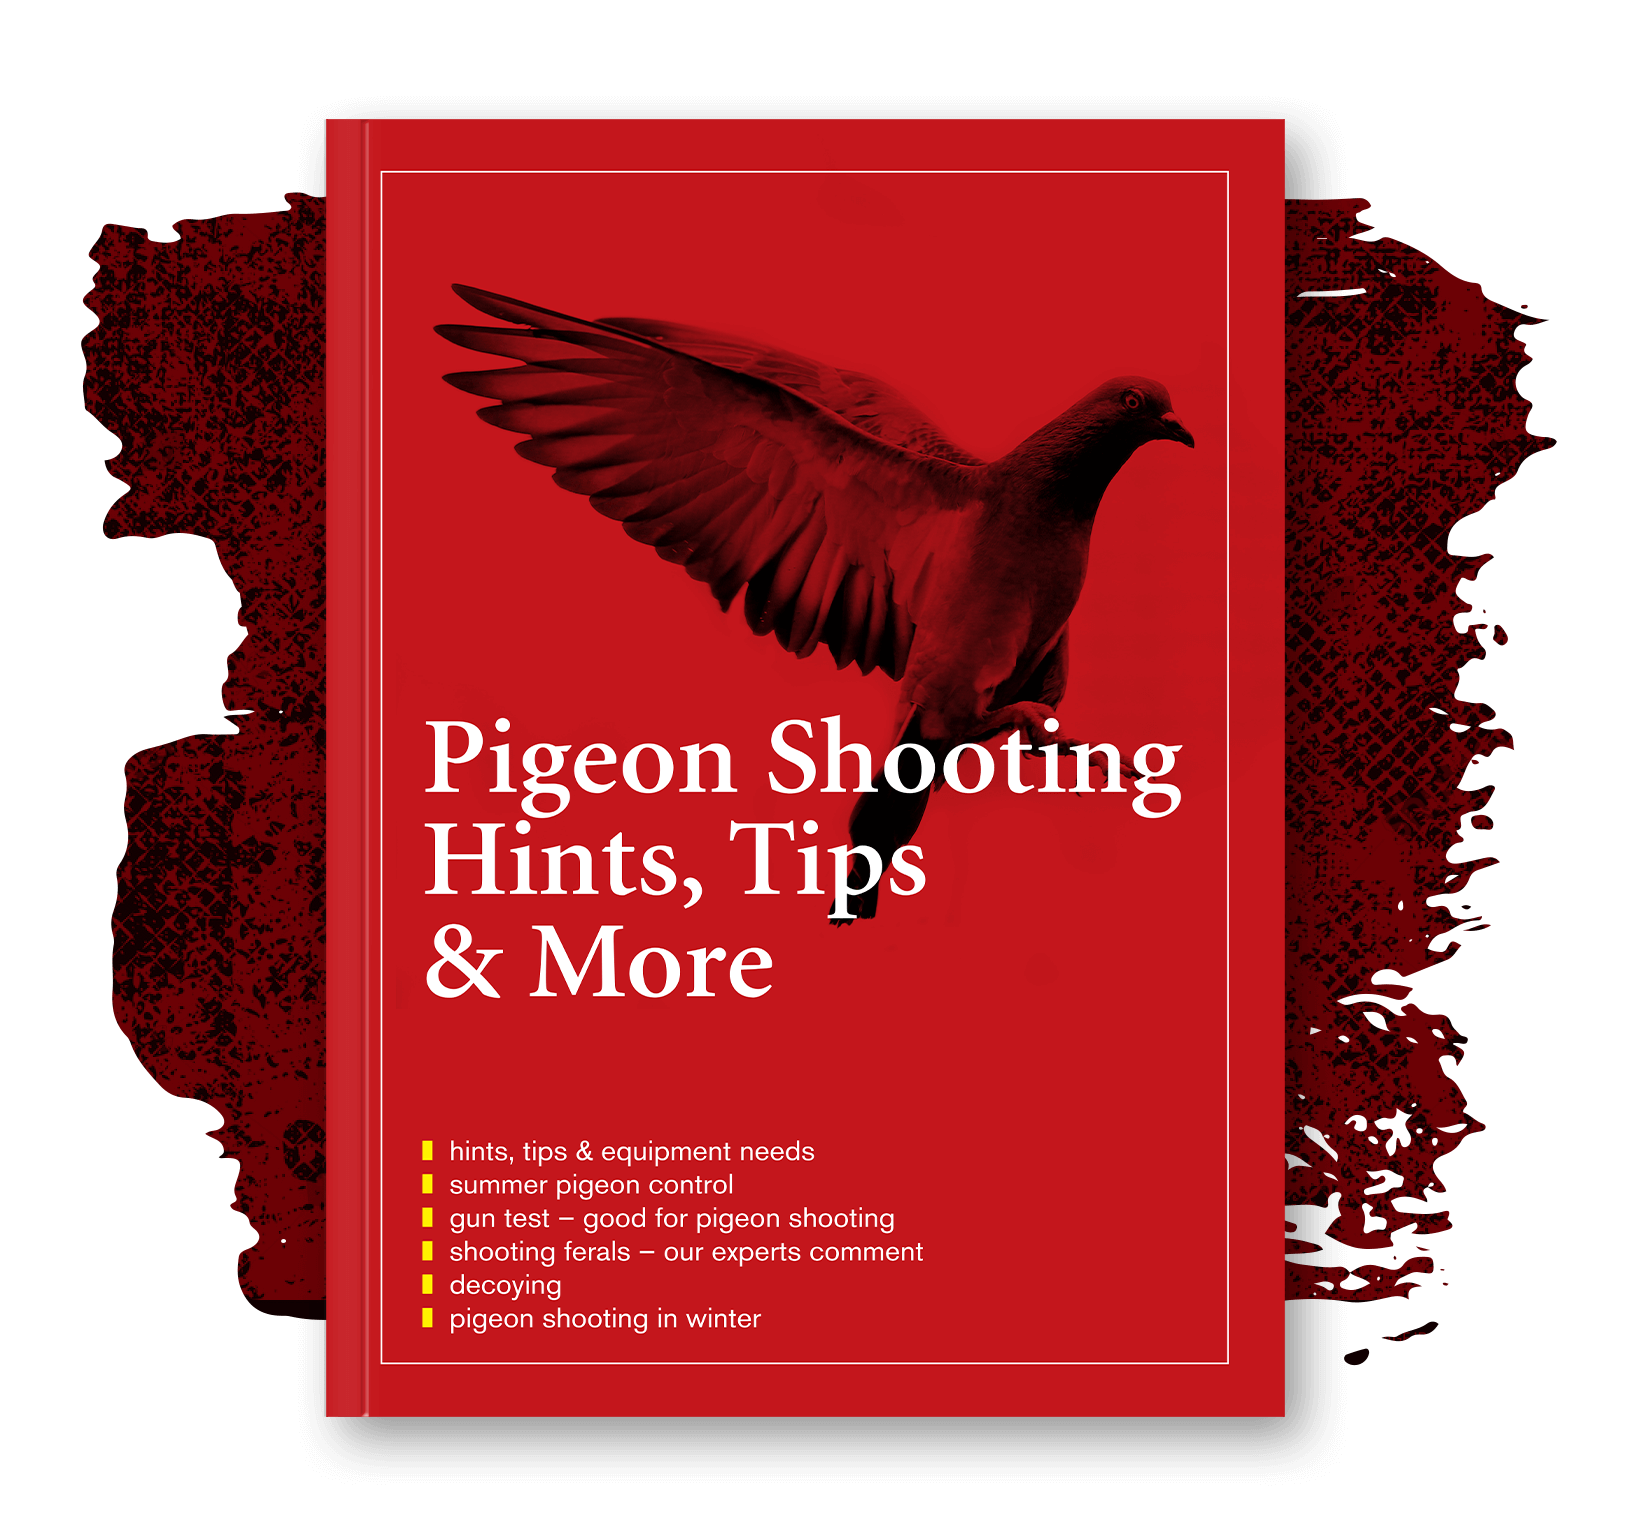 Pigeon shooting, hints, tips and more